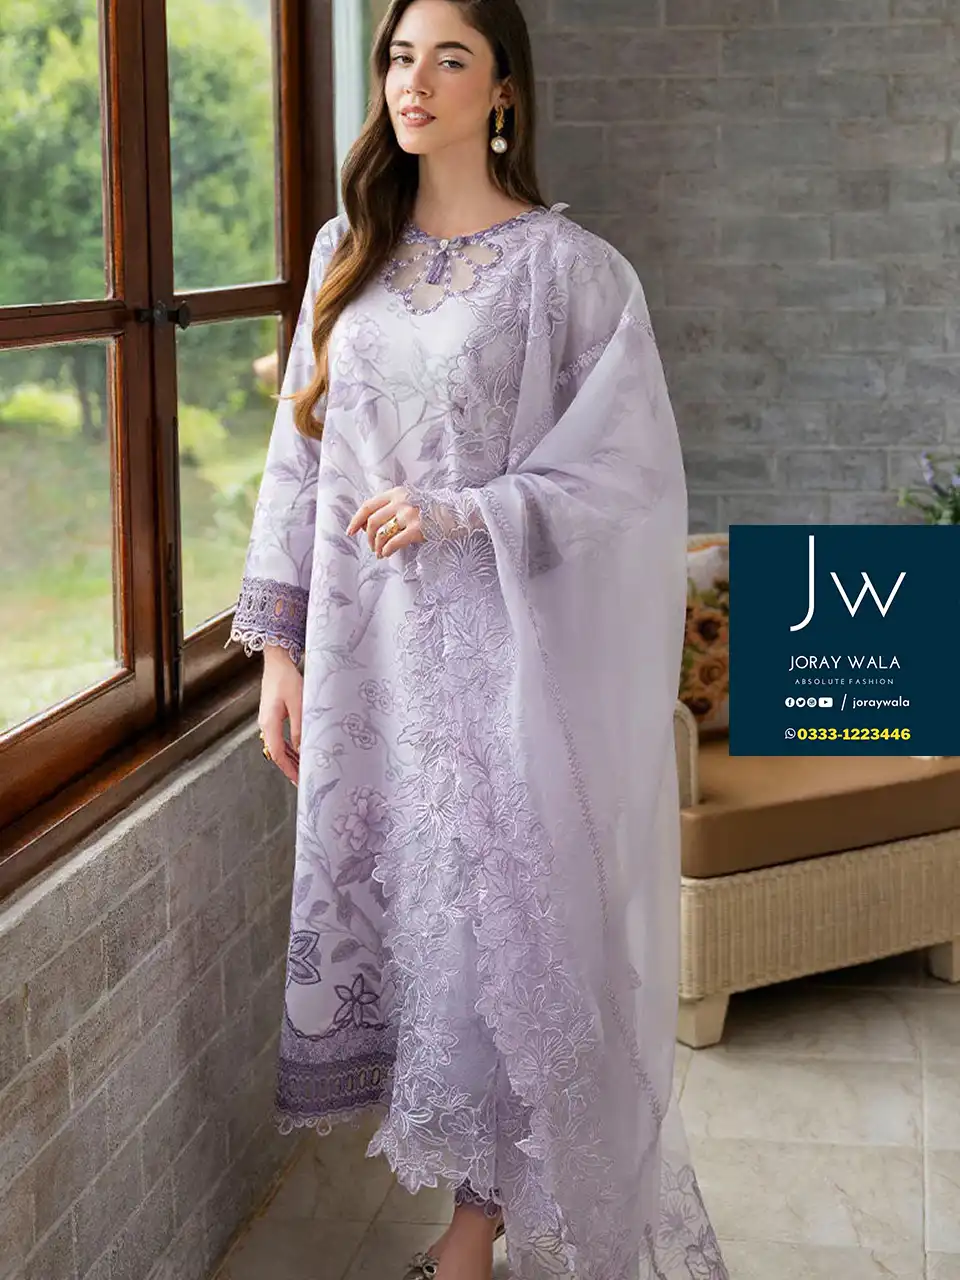 Partywear Graceful Ethnic Outfits Mulberry La Toscana with free delivery available at joraywala